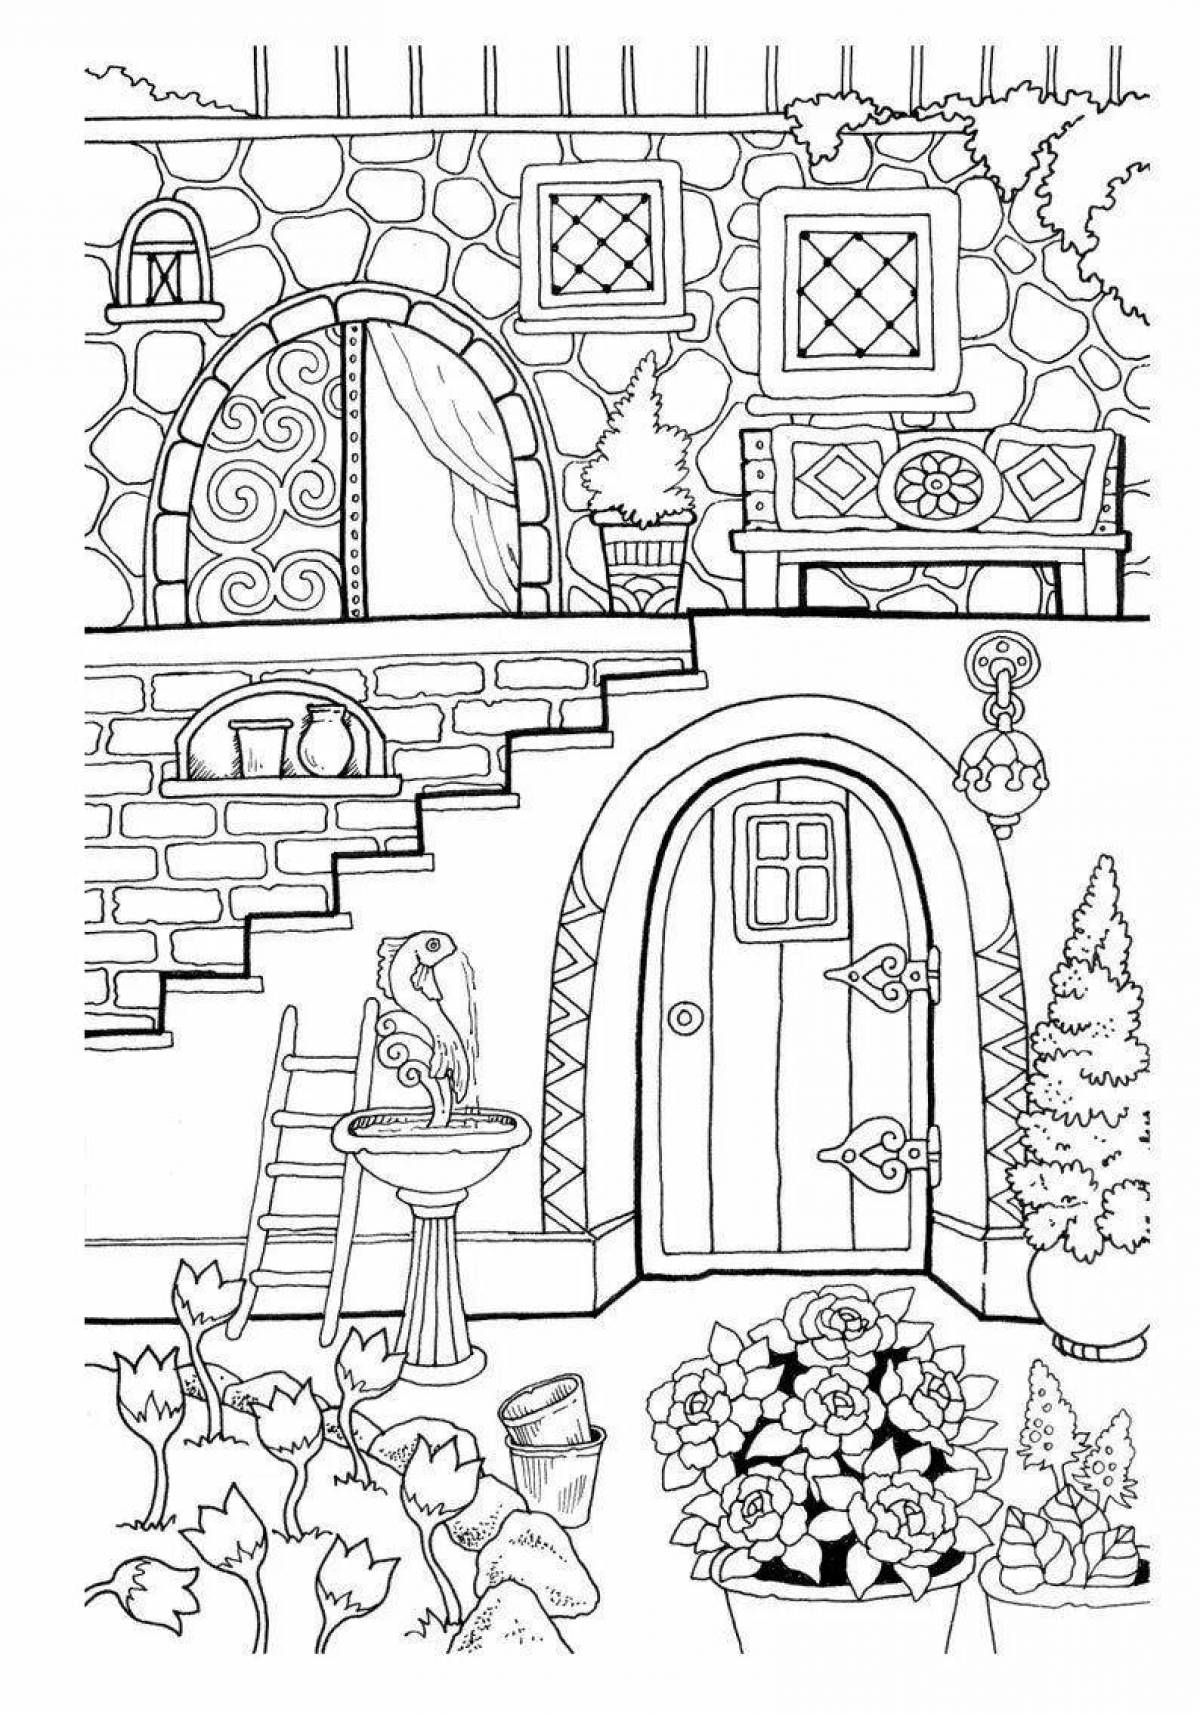 Coloring page stately home for adults